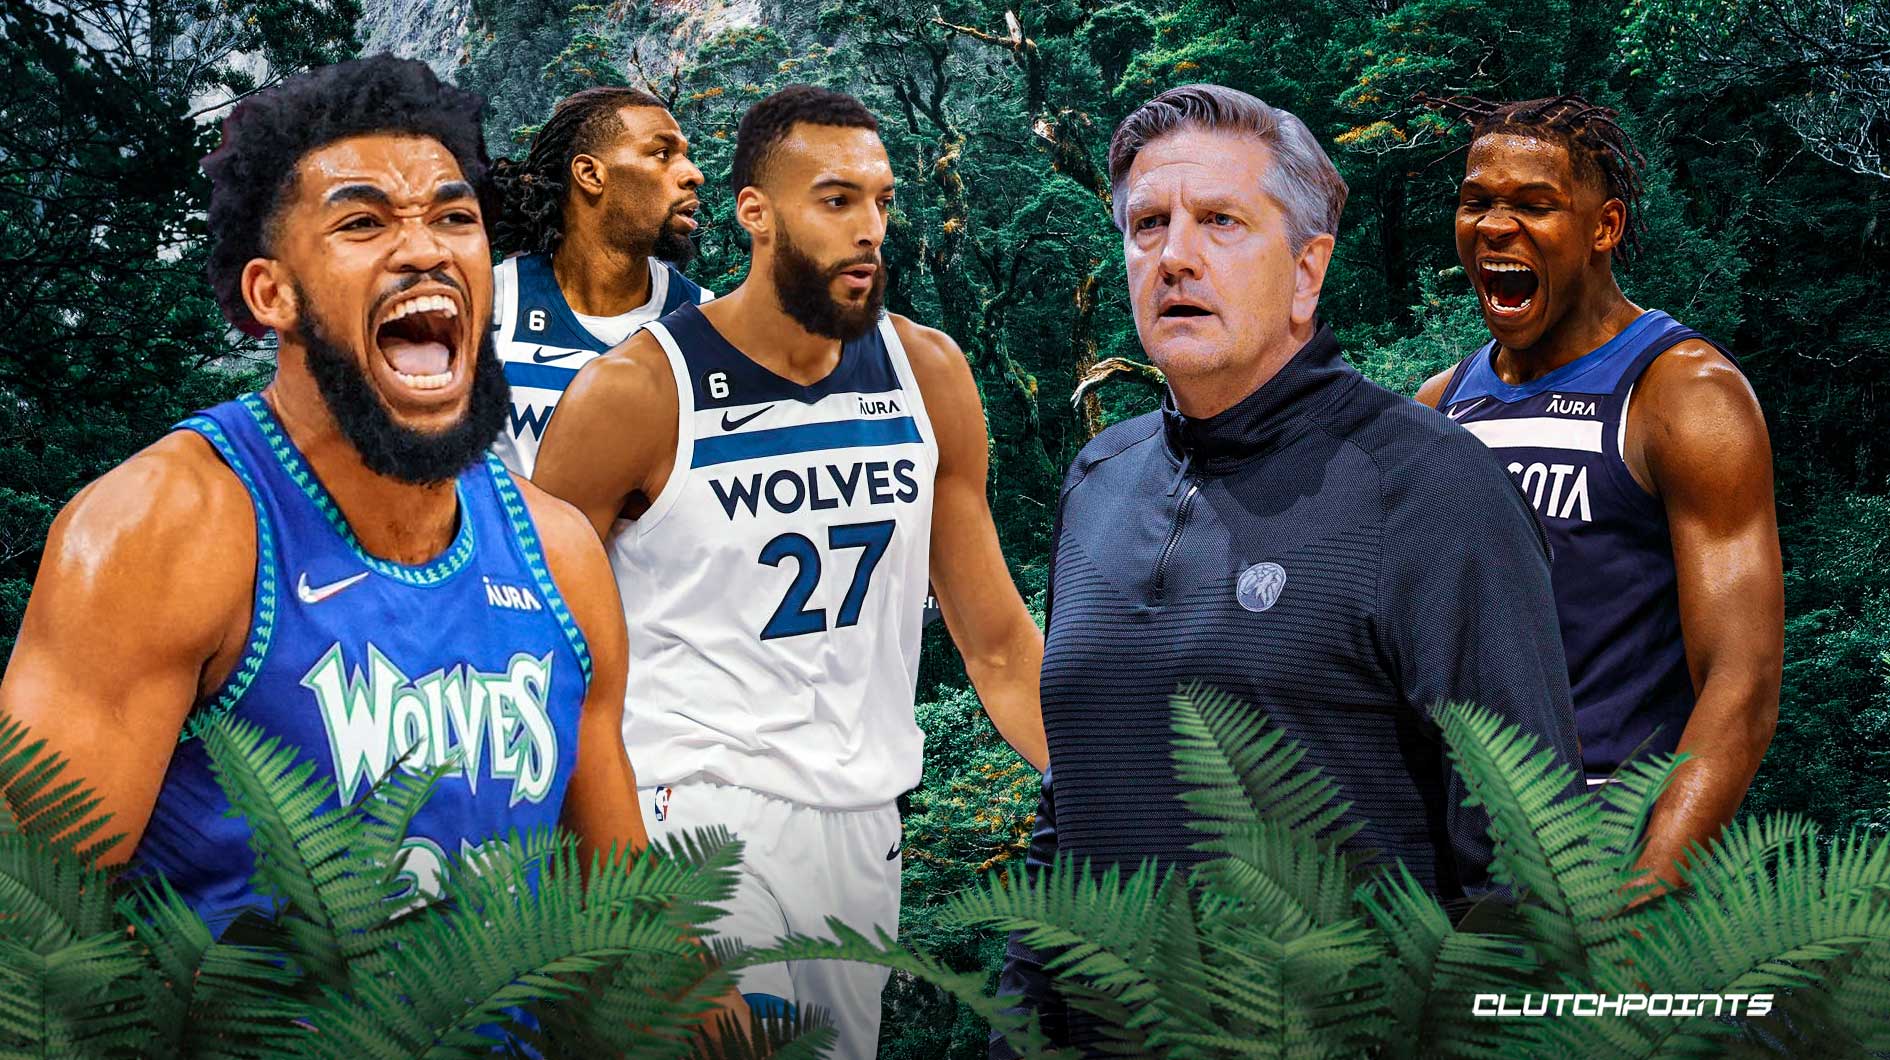 2023-24 Projected Starting Lineup For Minnesota Timberwolves